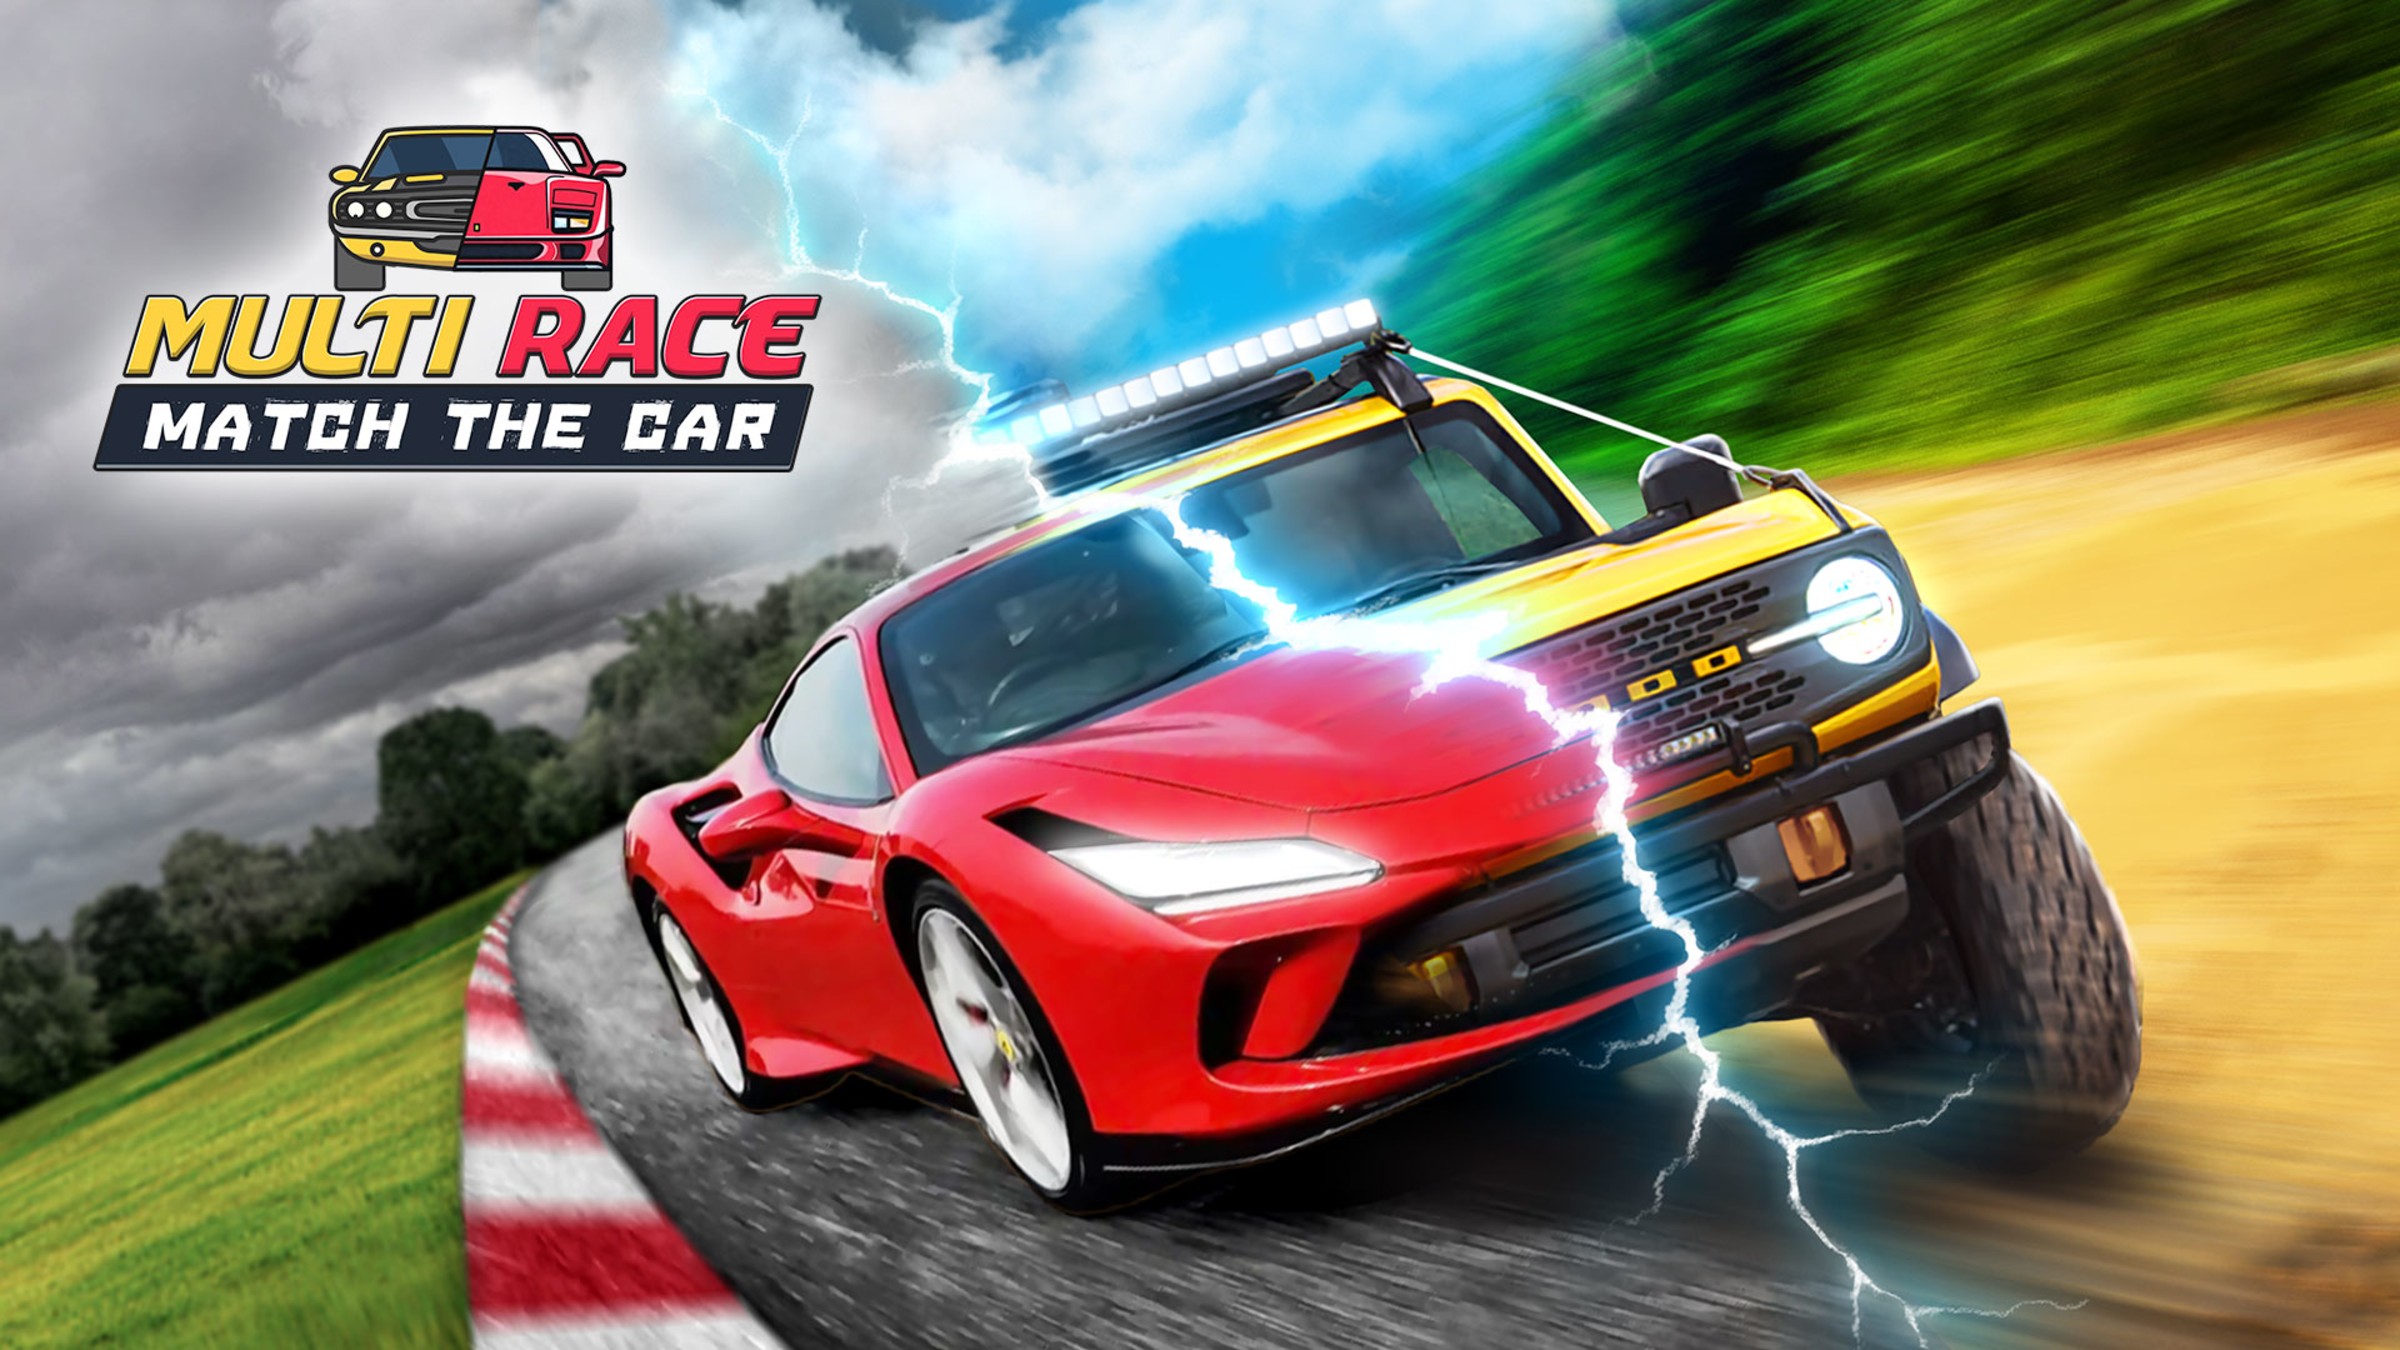 Multi Race: Match The Car for Nintendo Switch - Nintendo Official Site